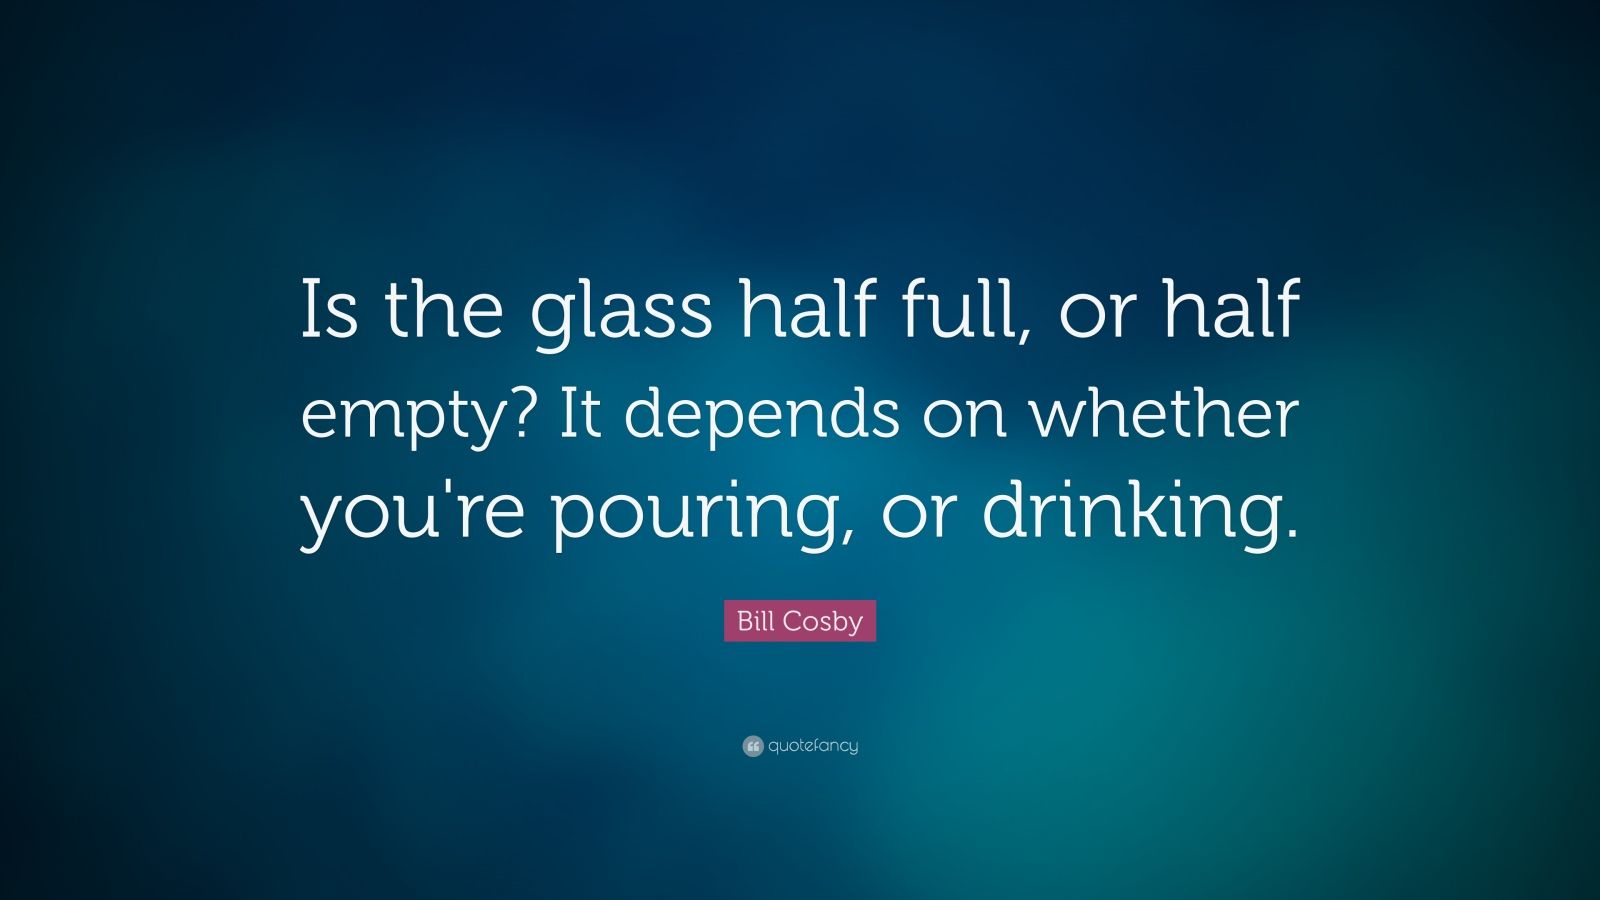 Bill Cosby Quote: “Is the glass half full, or half empty? It depends on ...